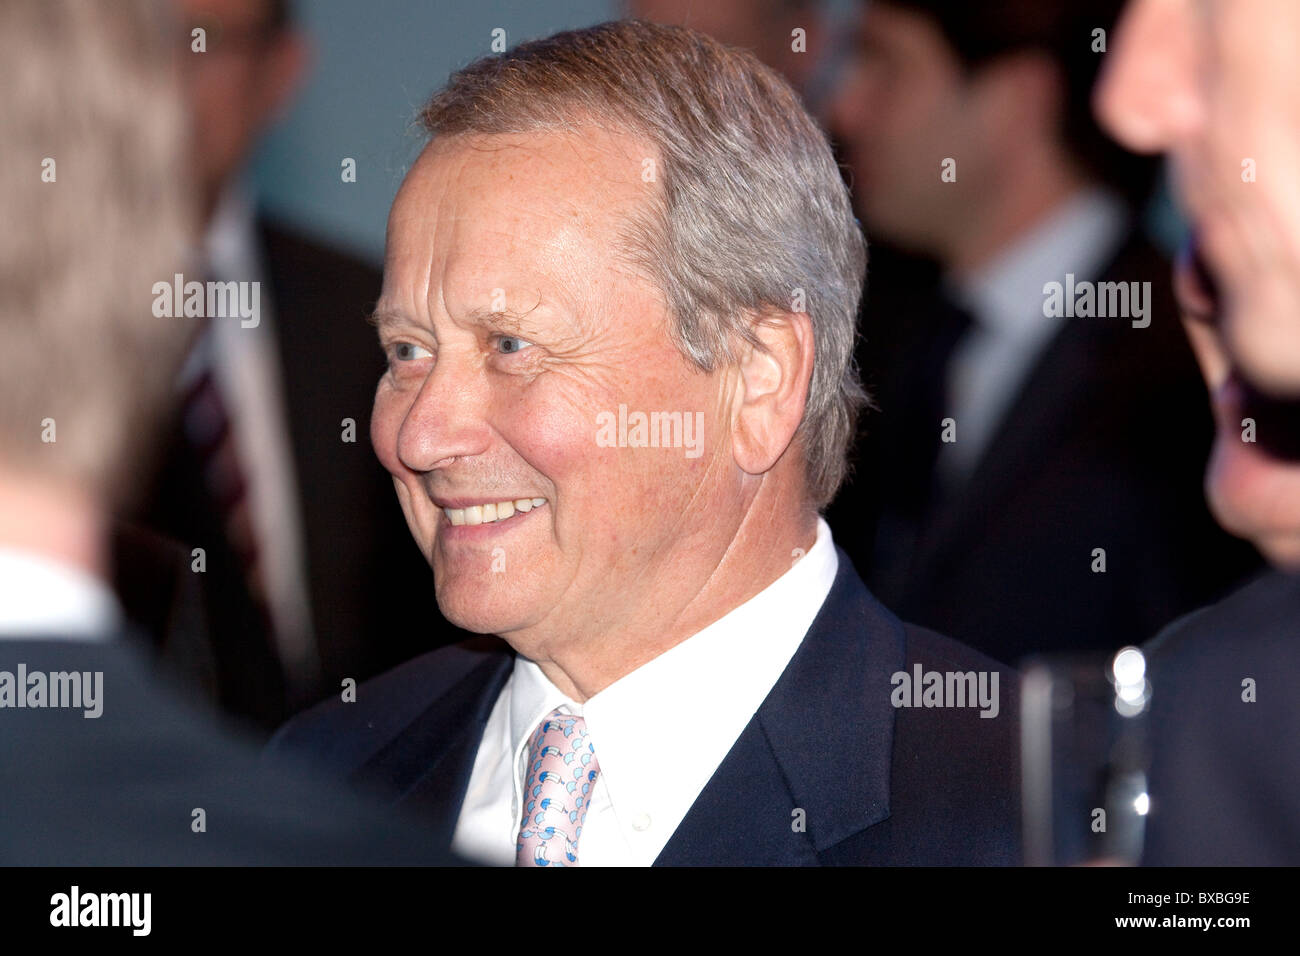 Wolfgang Porsche, chairman of the supervisory board of Porsche Automobil Holding SE, during the Group Night of the Volkswagen Stock Photo